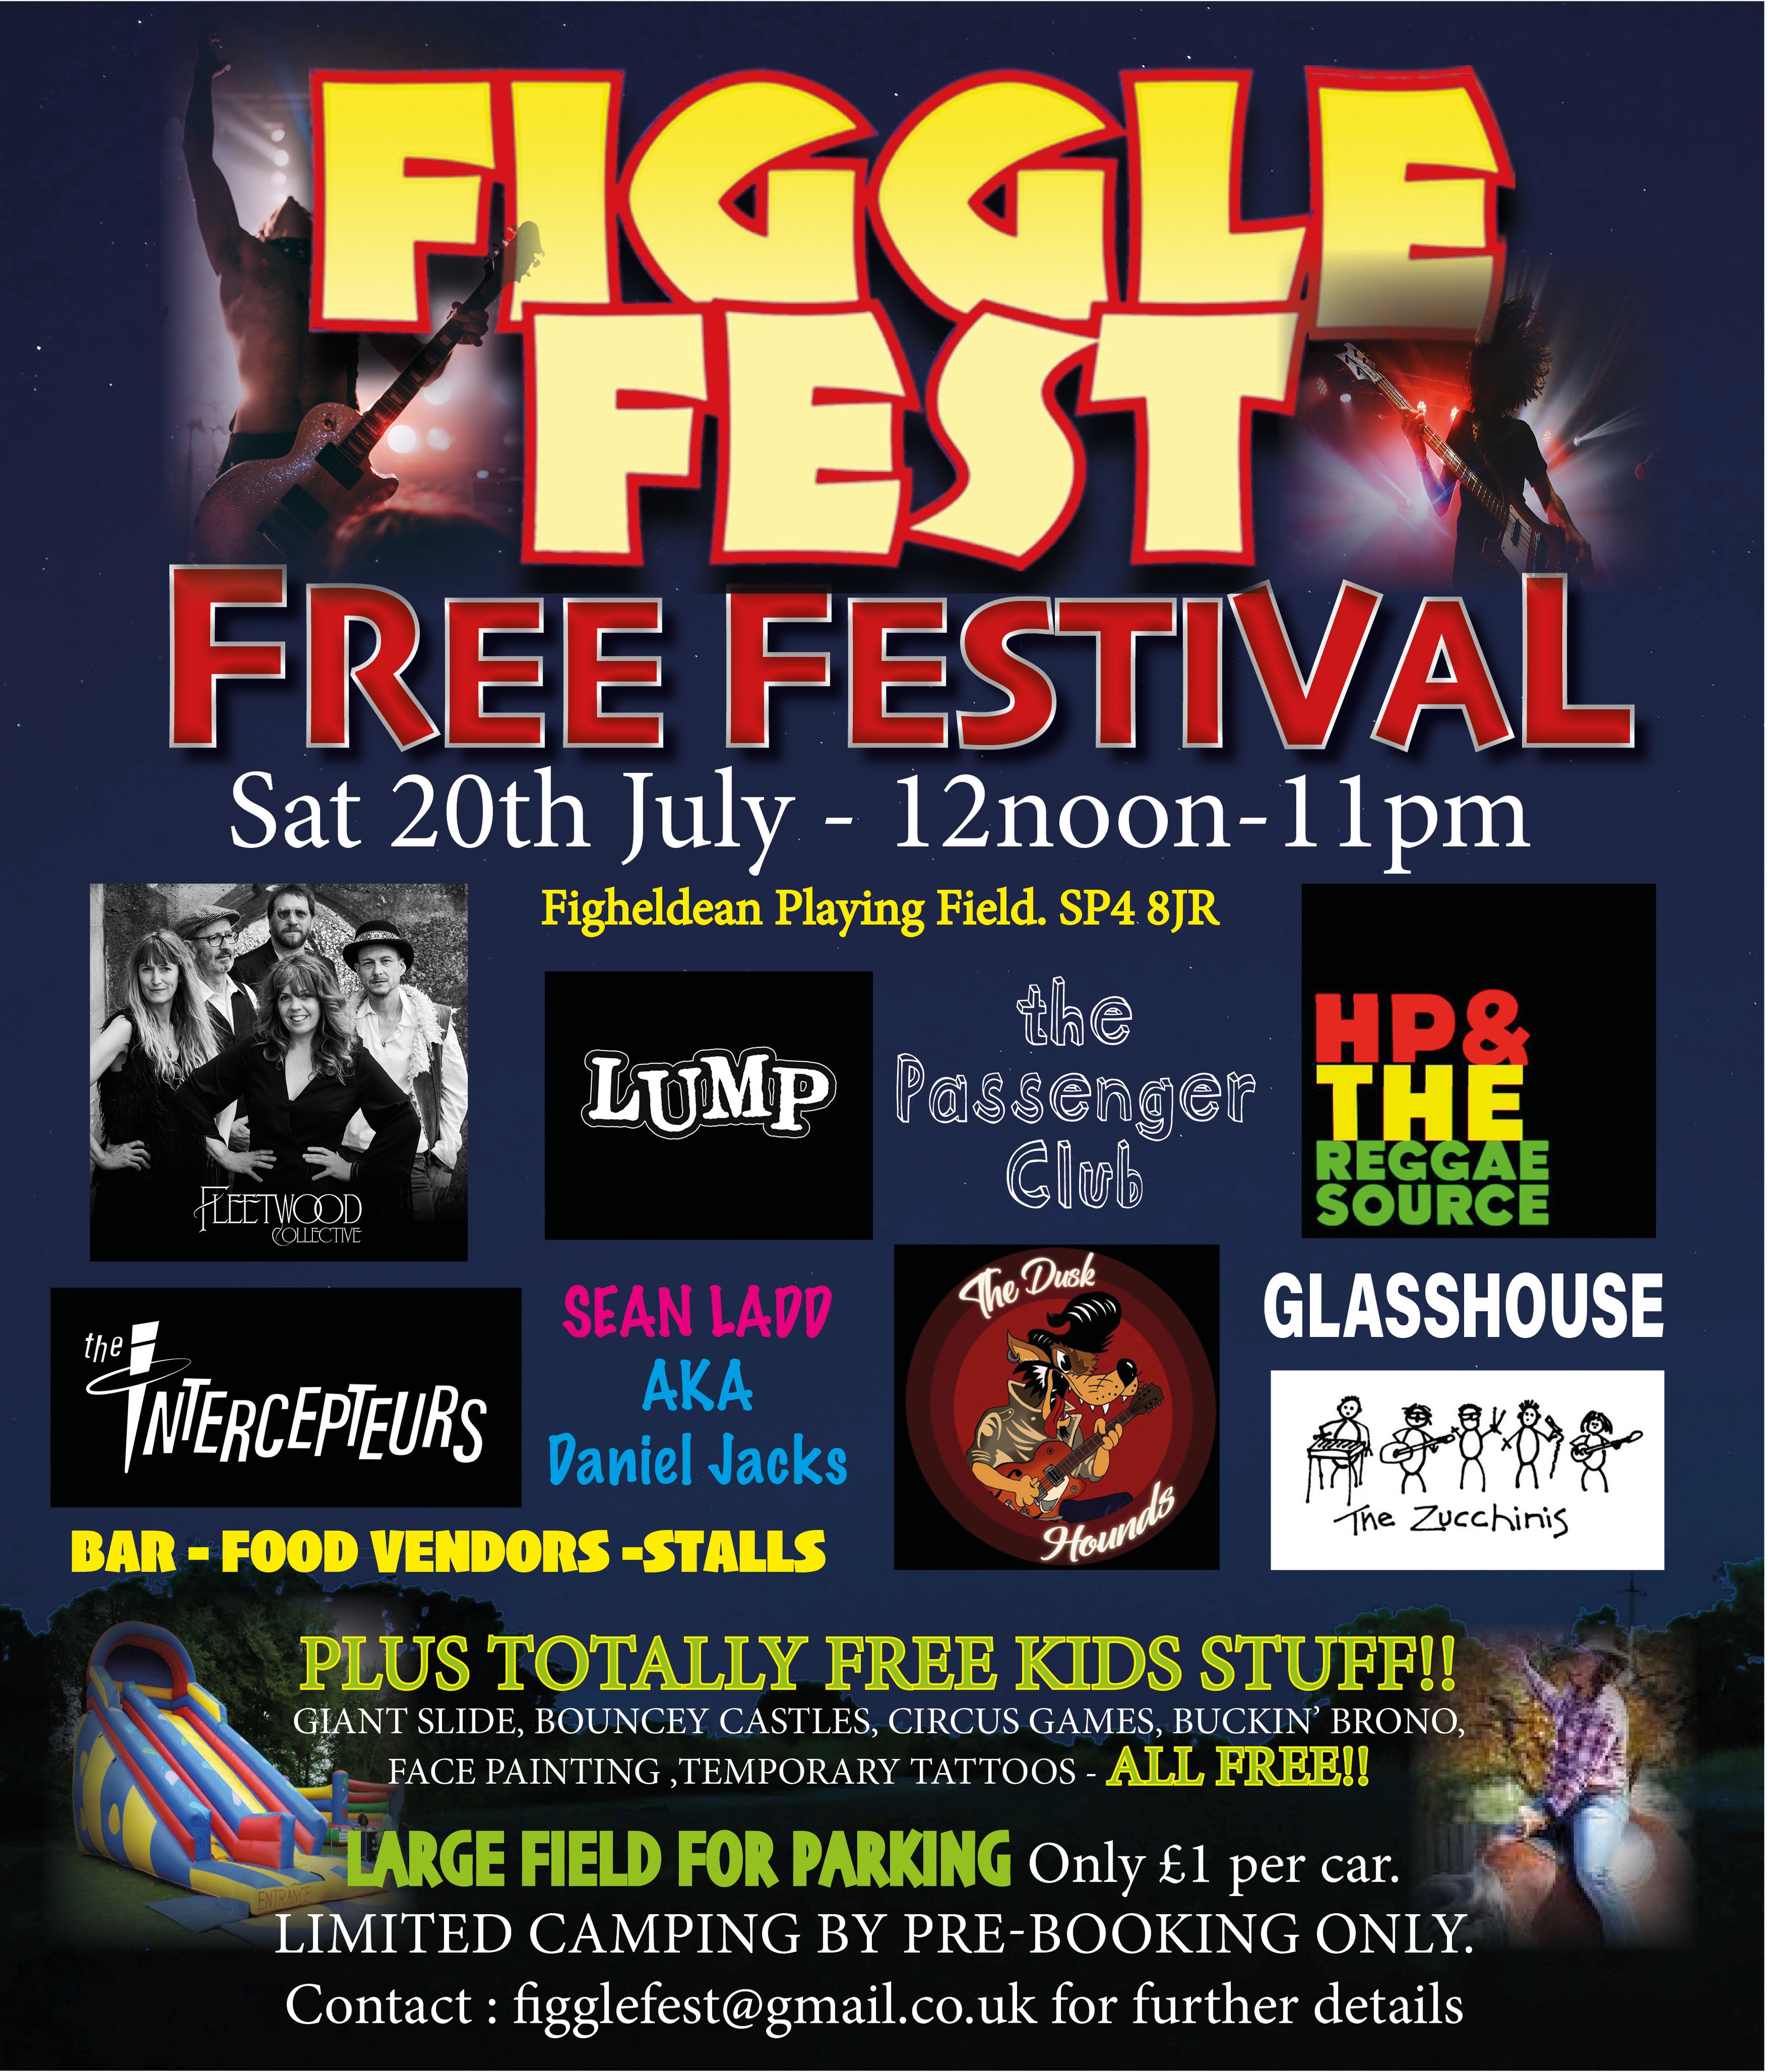 Figgle Fest - Fleetwood Collective + The Intercepteurs + HP & The Reggae Source + Passenger Club + LUMP + The Zucchinis + Glasshouse